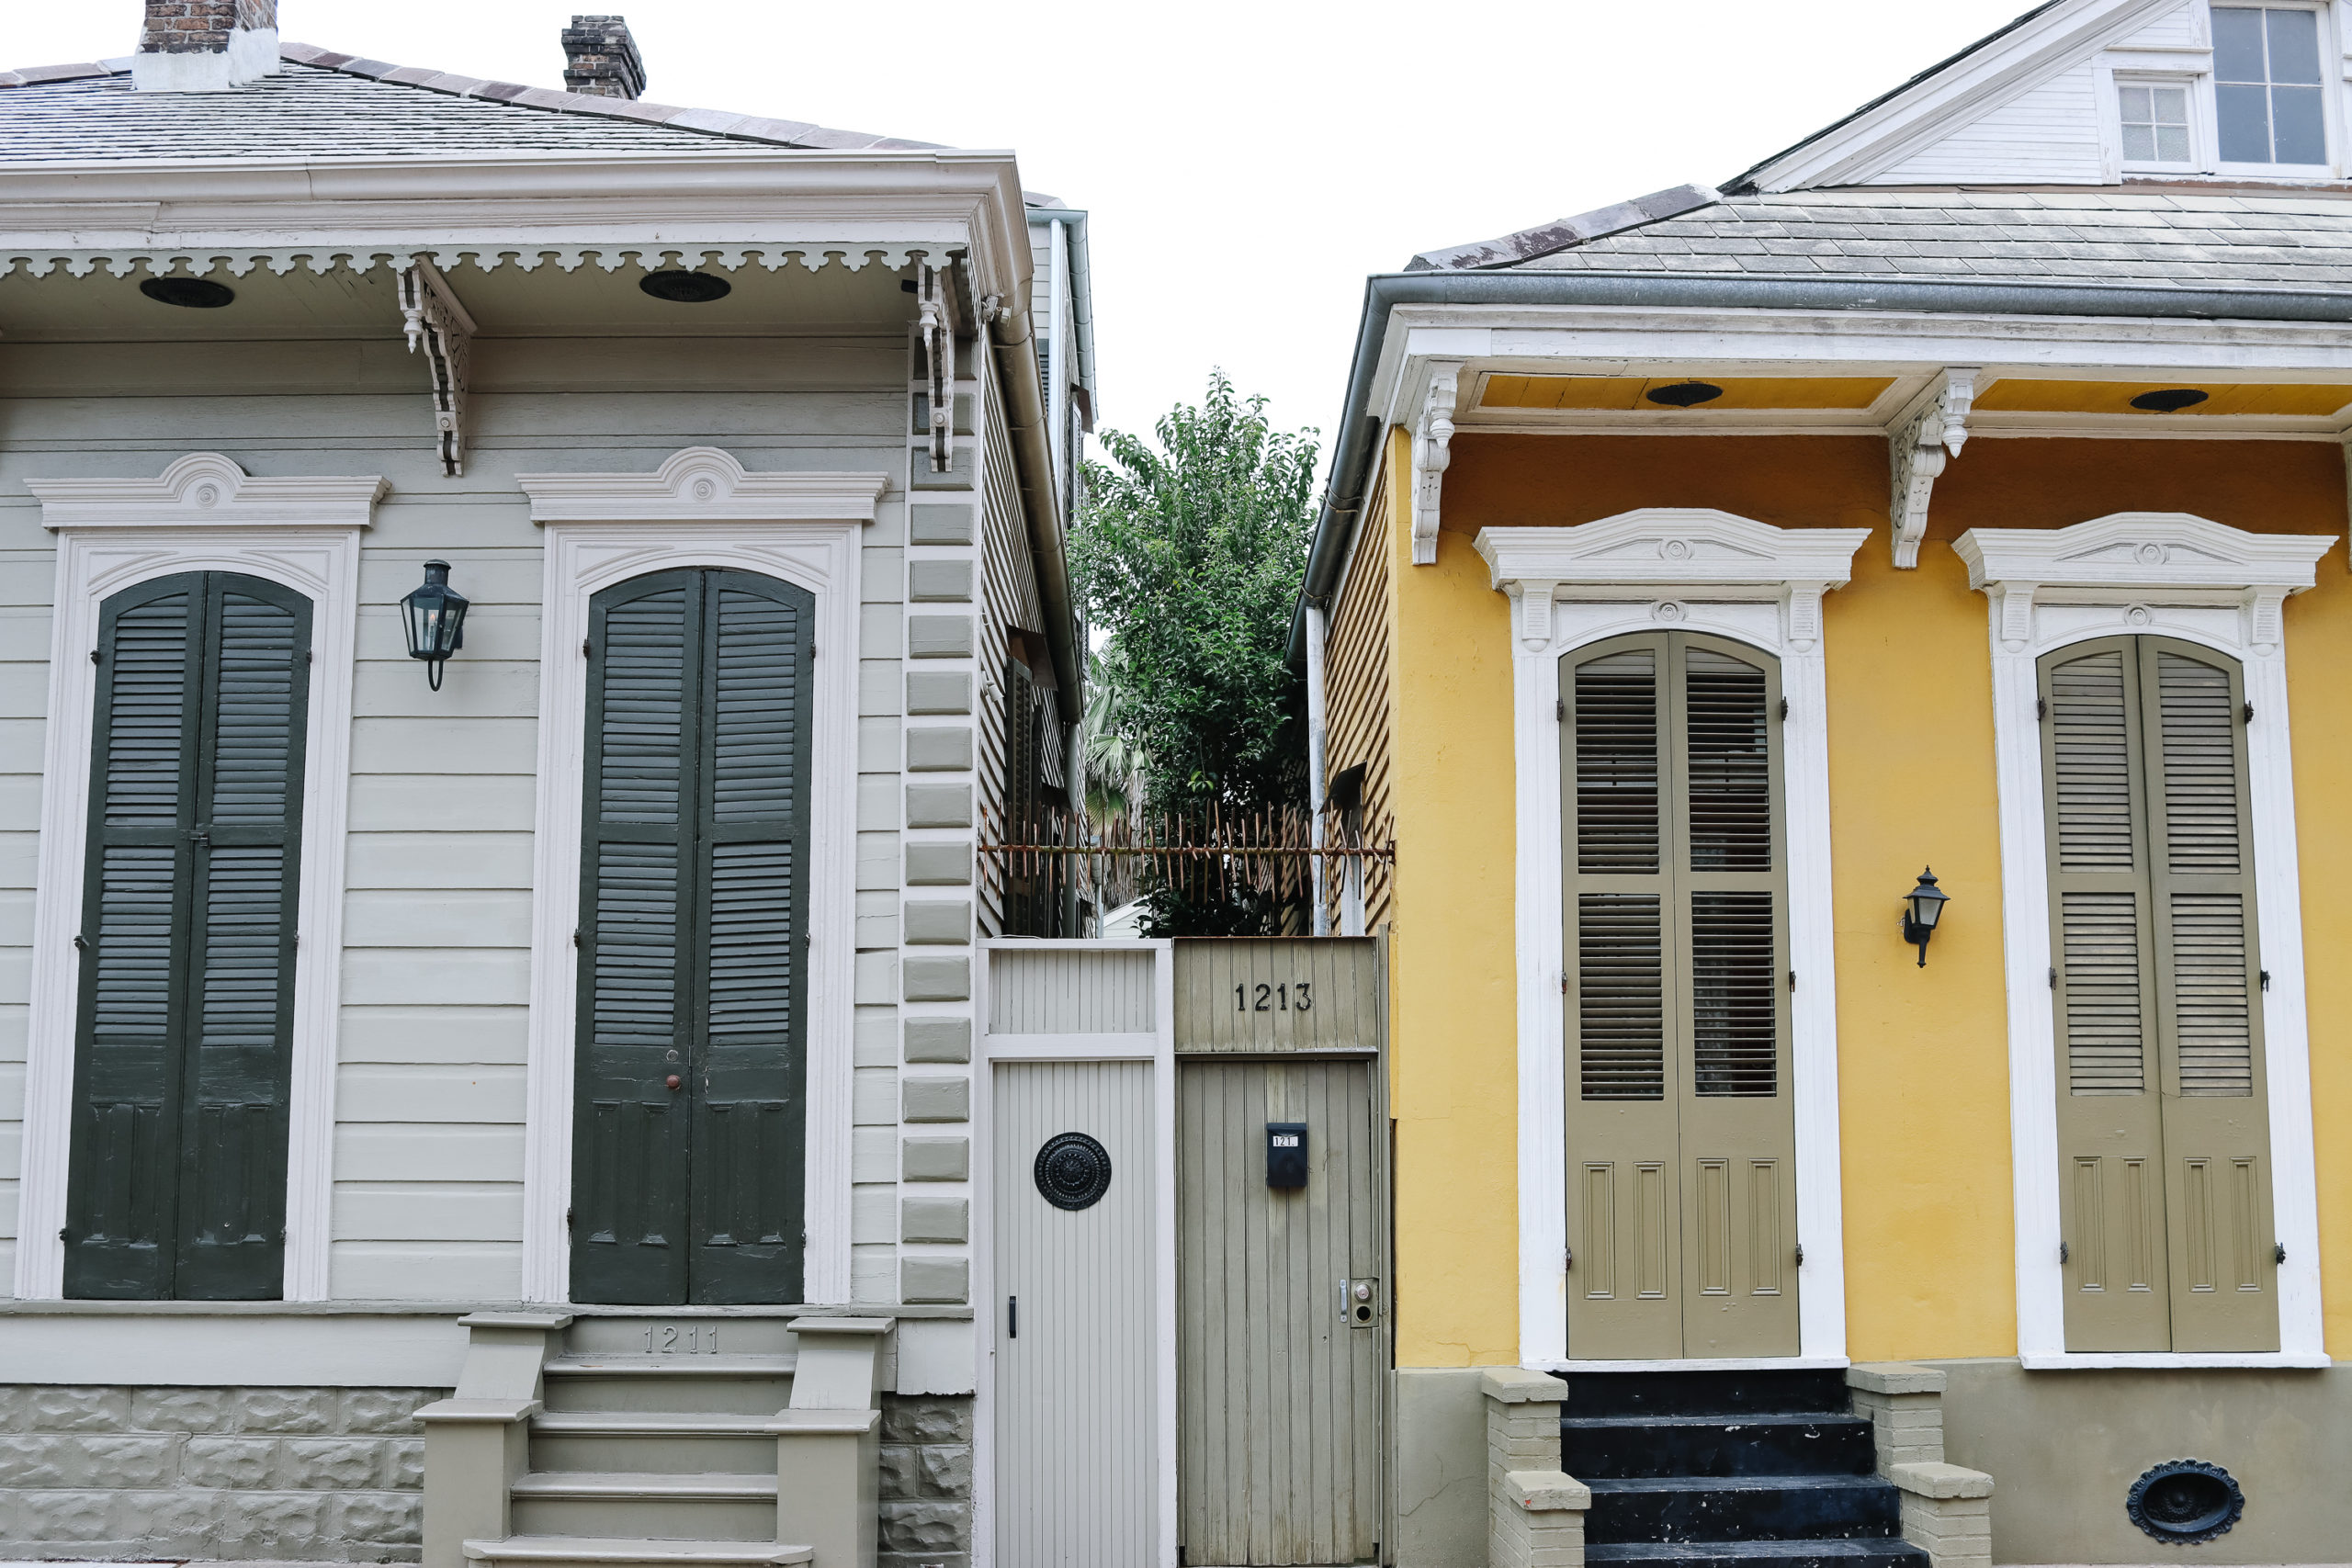 New Orleans Photo Diary | Finding Beautiful Truth